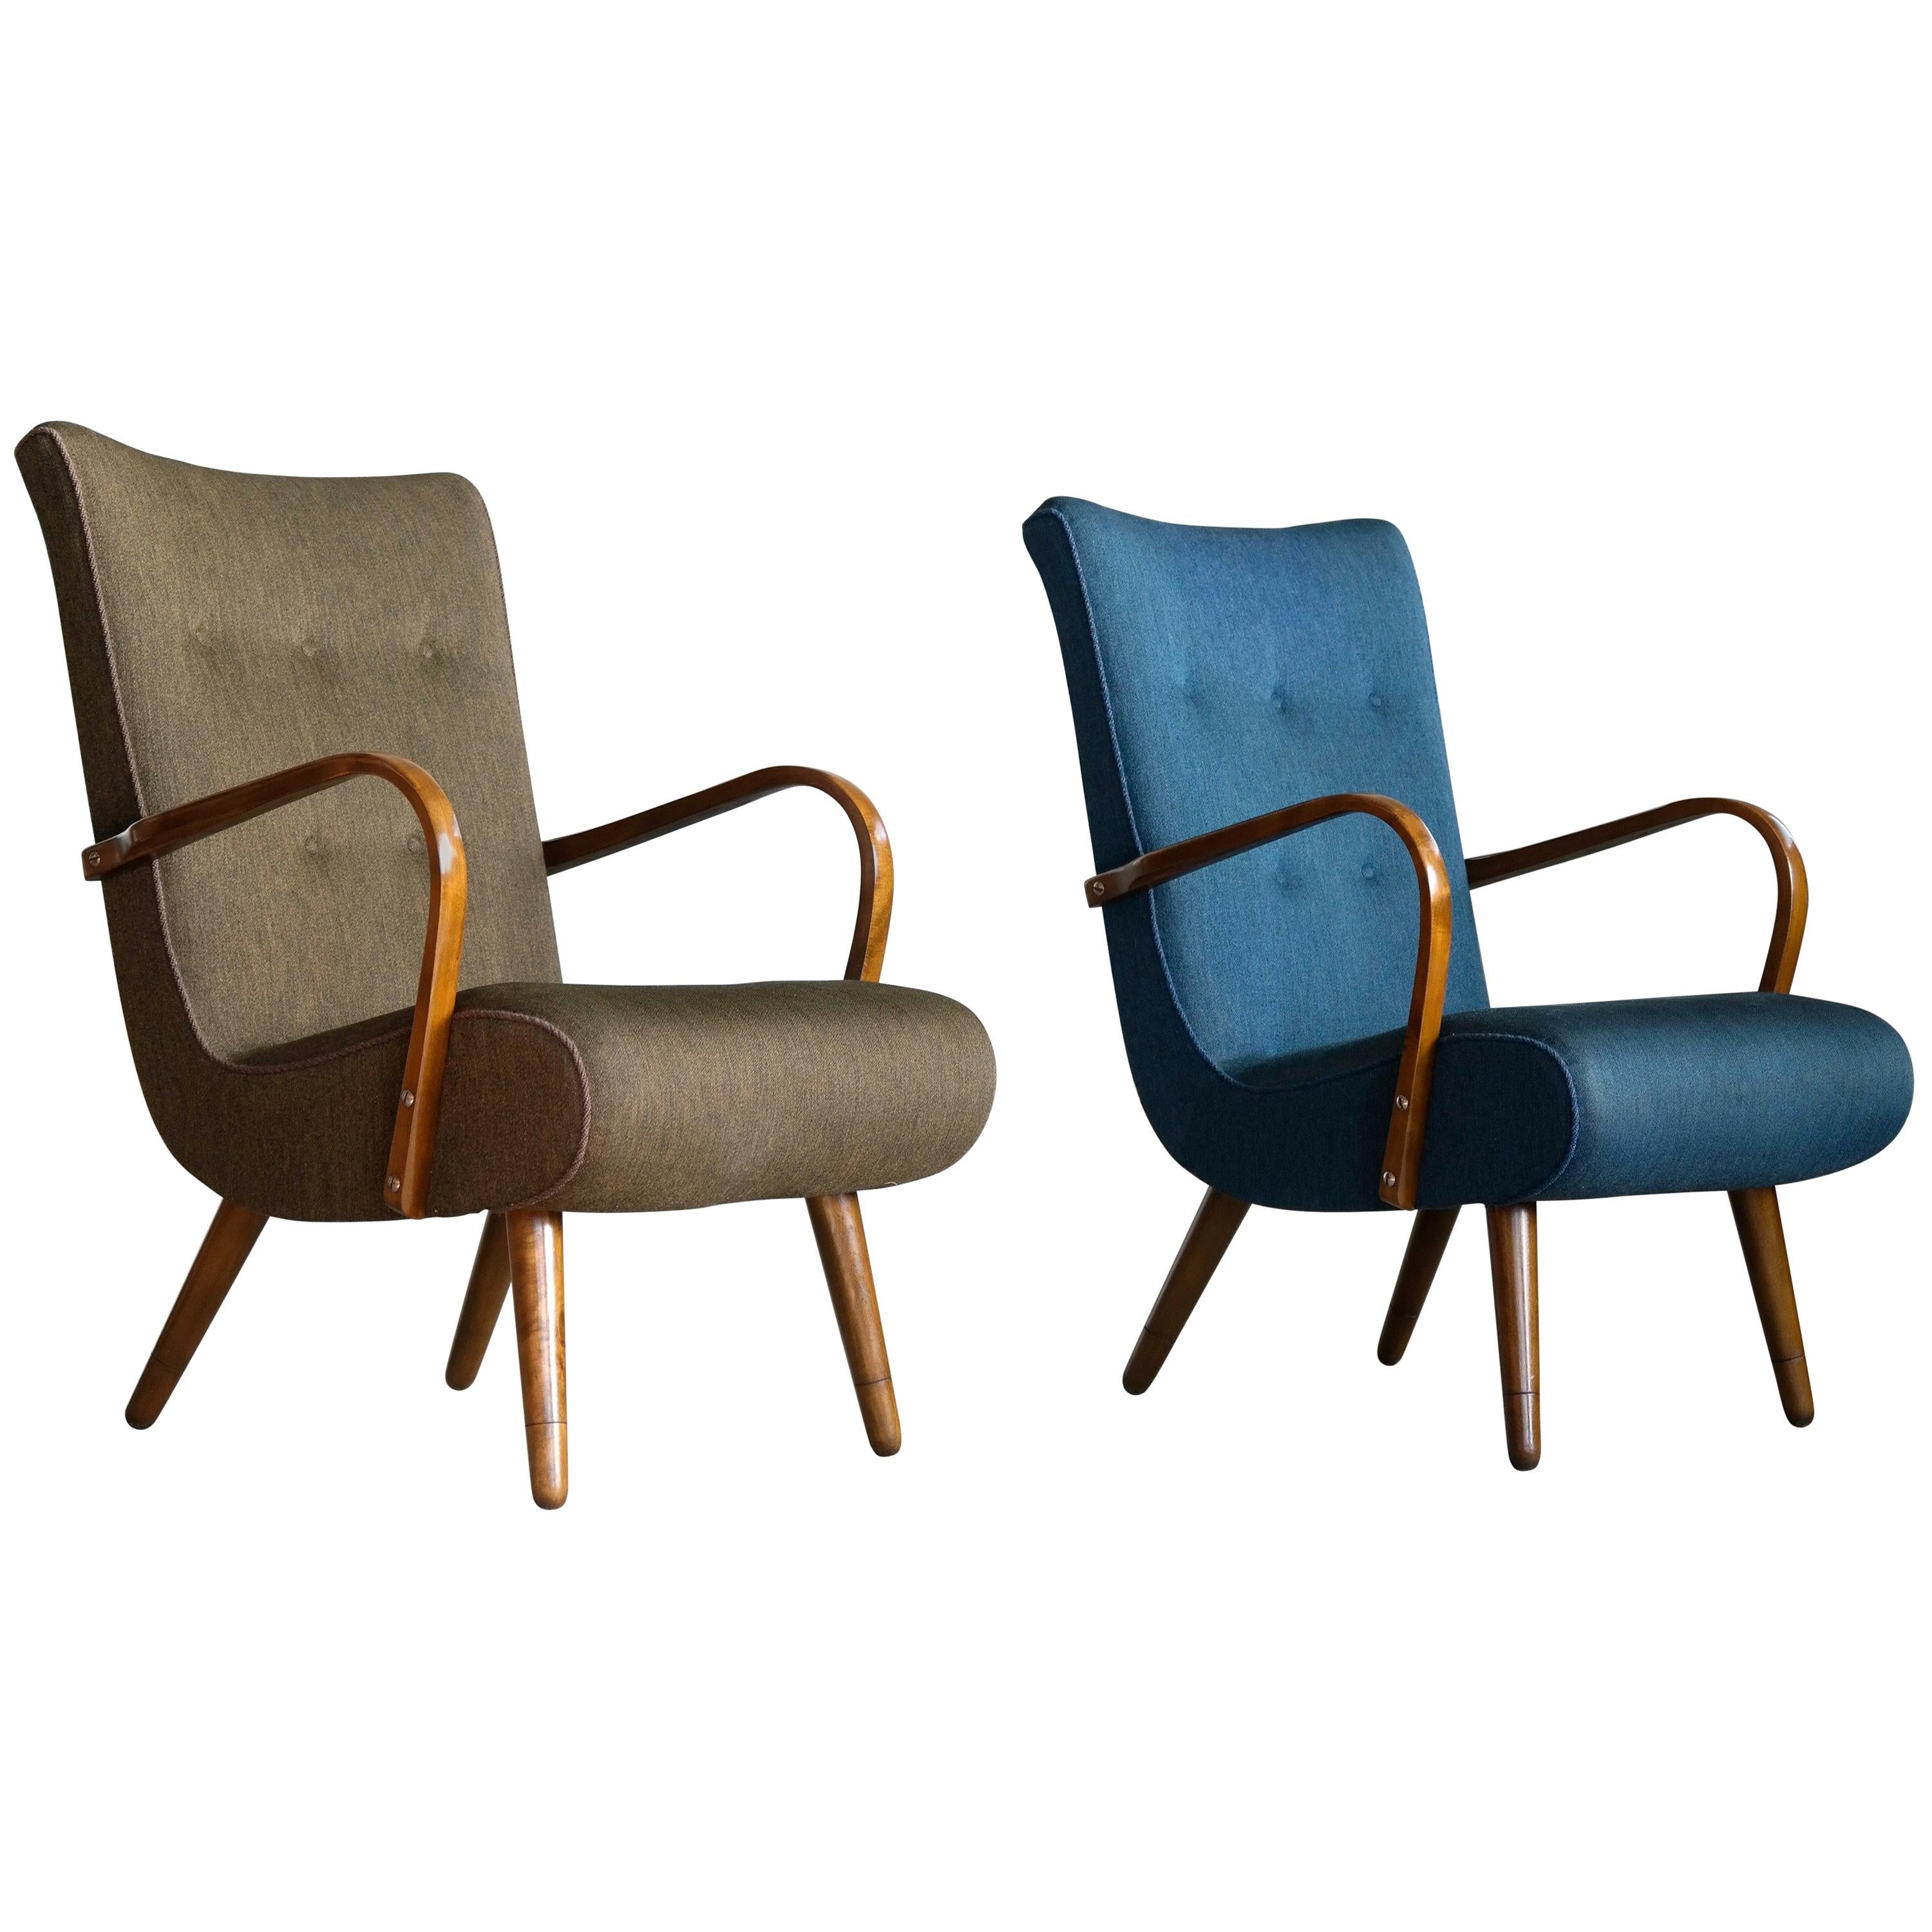 Pair of Danish 1950s Sculptural Lounge Chairs with Curved Wooden Armrests